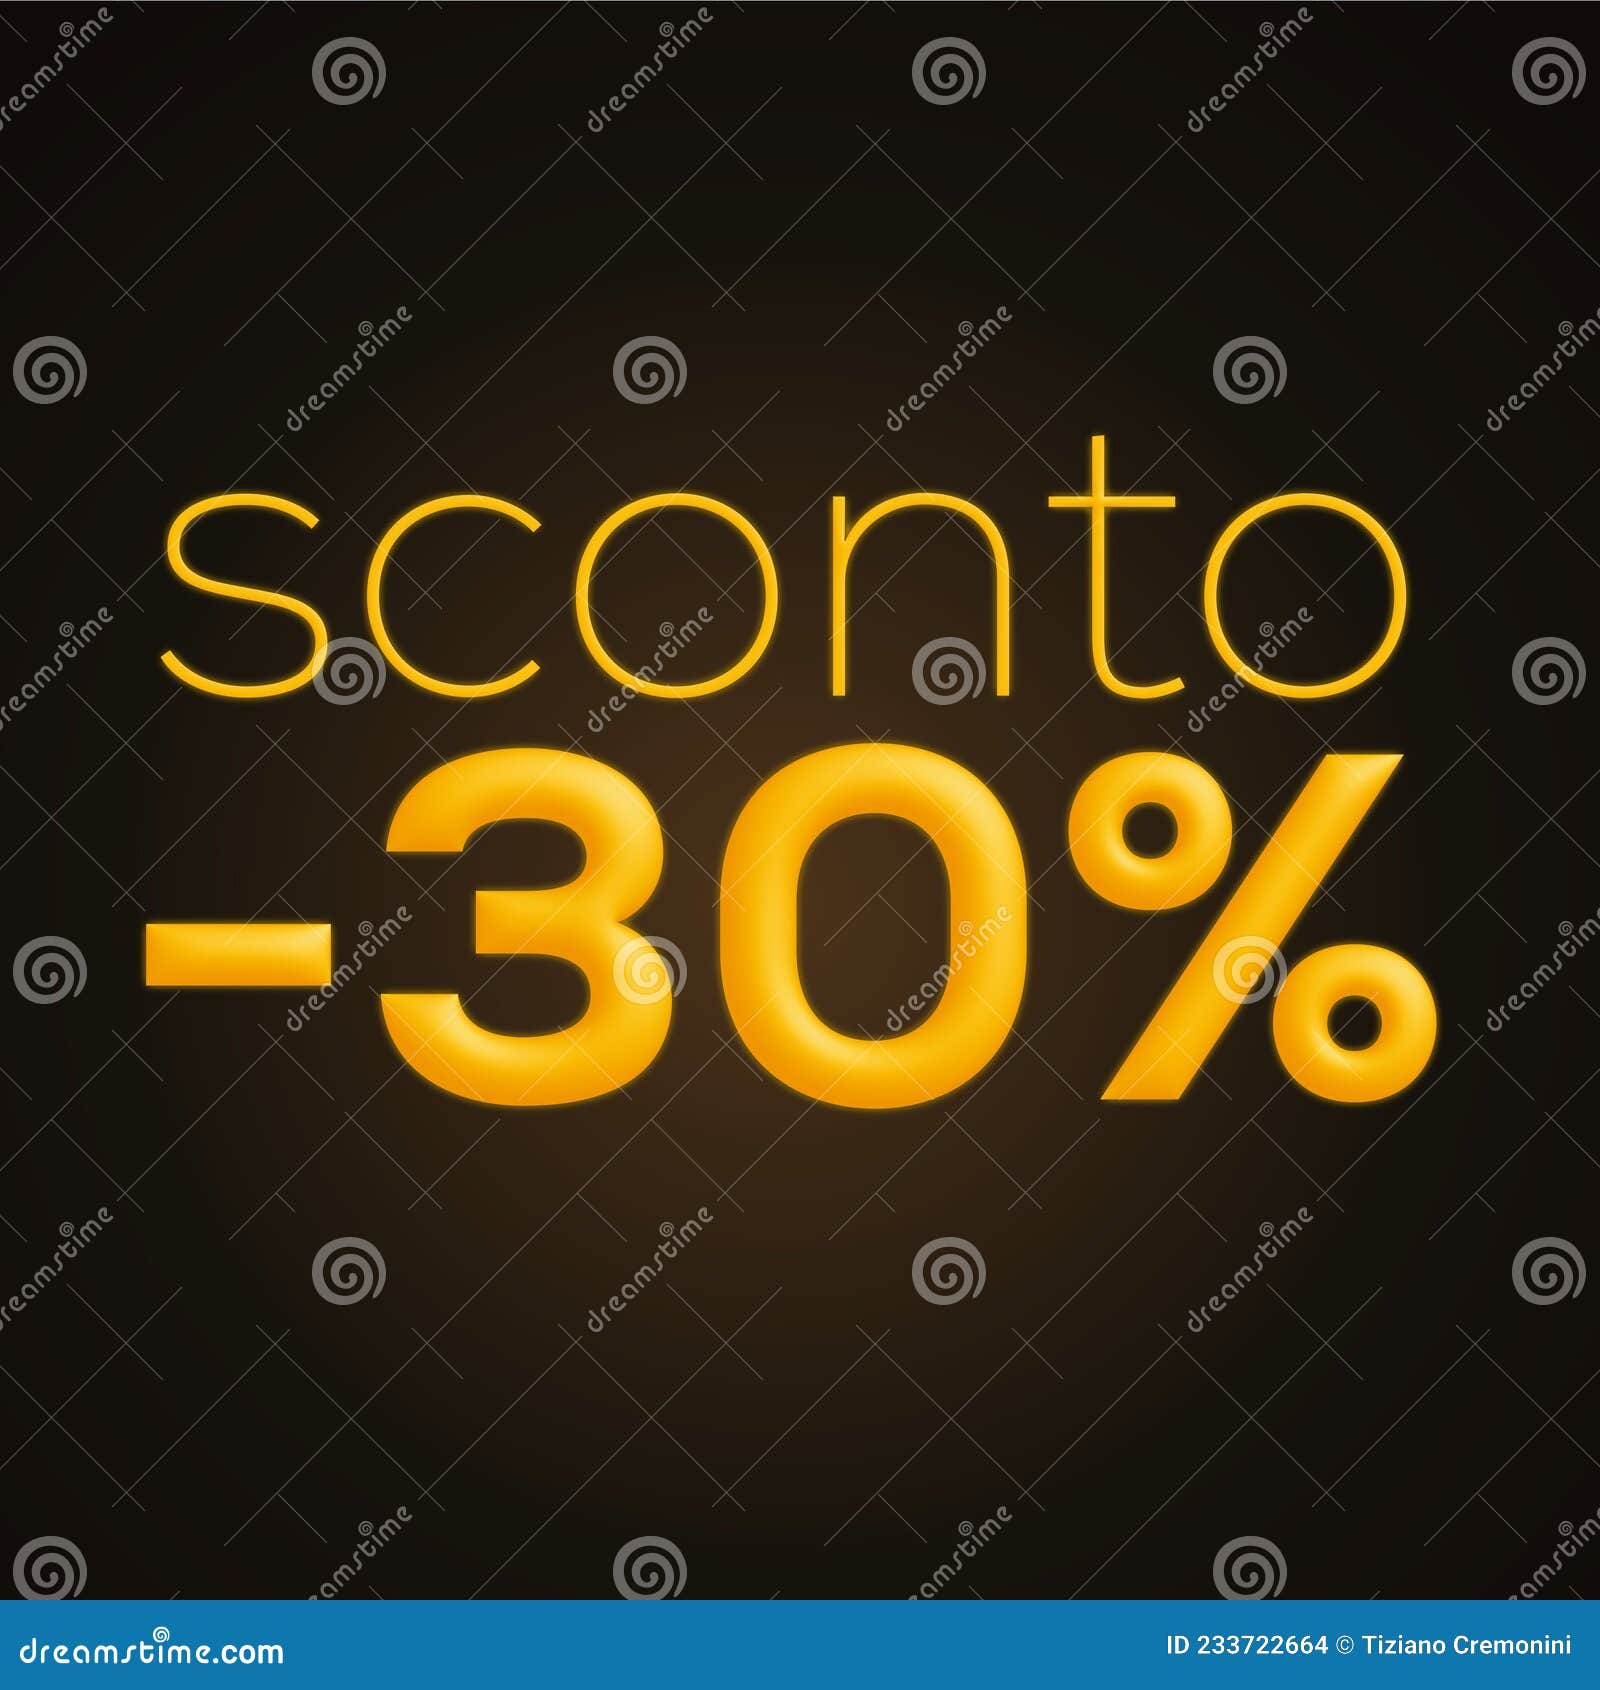 sconto 30%, italian words for 30% off discount, 3d rendering on black background